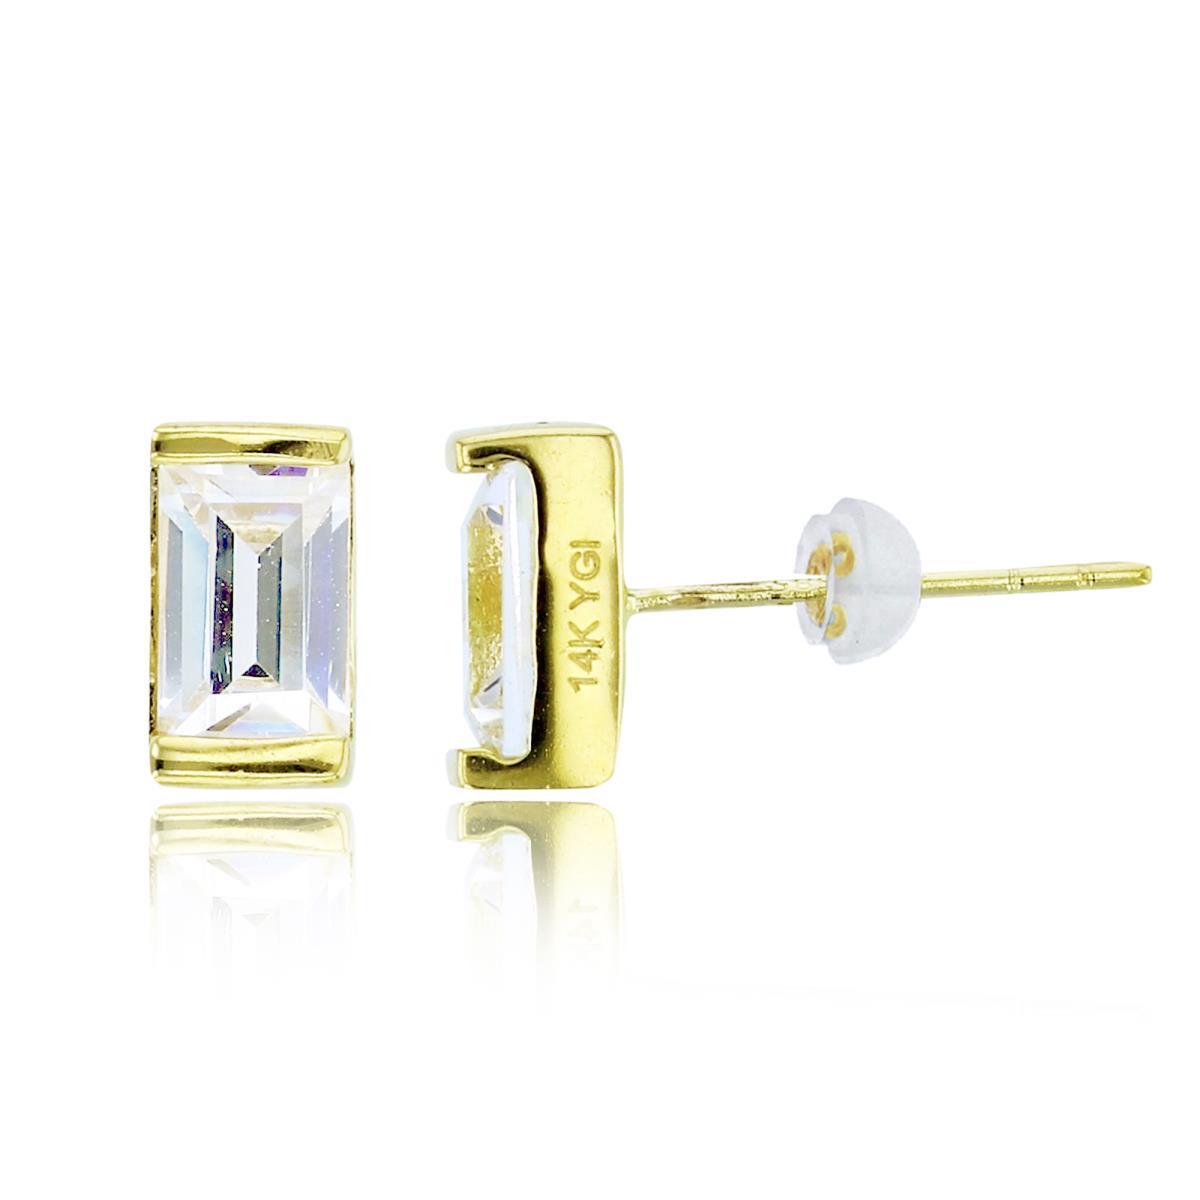 14K Yellow Gold 6x4mm EC CZ Studs with Silicon Backs